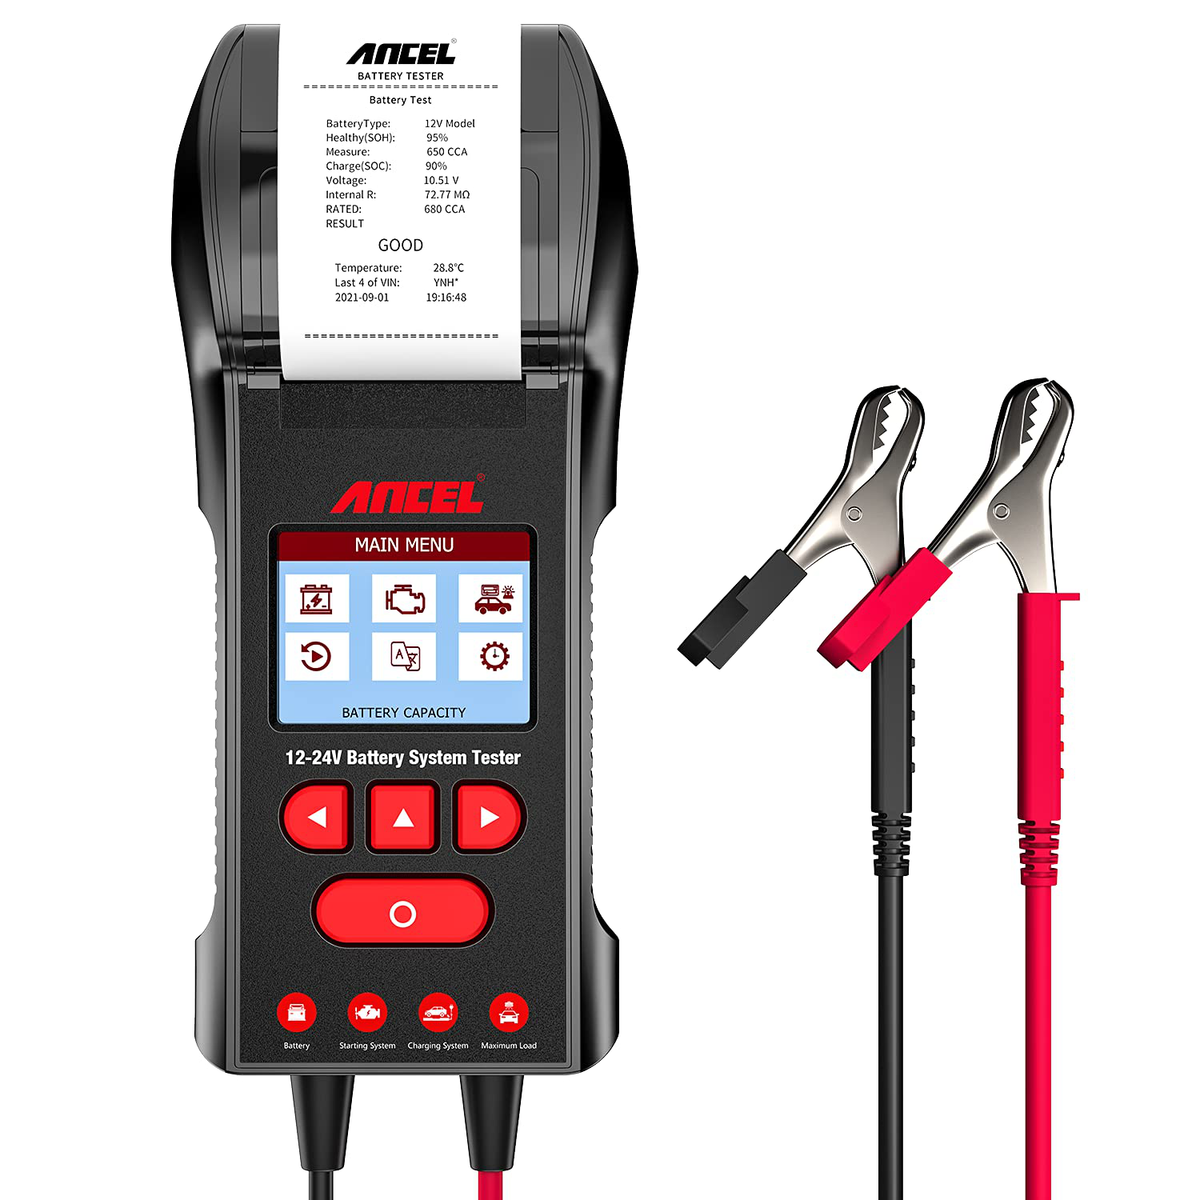 ANCEL BST600 12V/24V 100-2000 CCA Automotive Battery Temperature Load Tester Car Cranking Charging System Analyzer Scan Tool with Printer for Trucks Cars Motorcycles - Auto GoShop